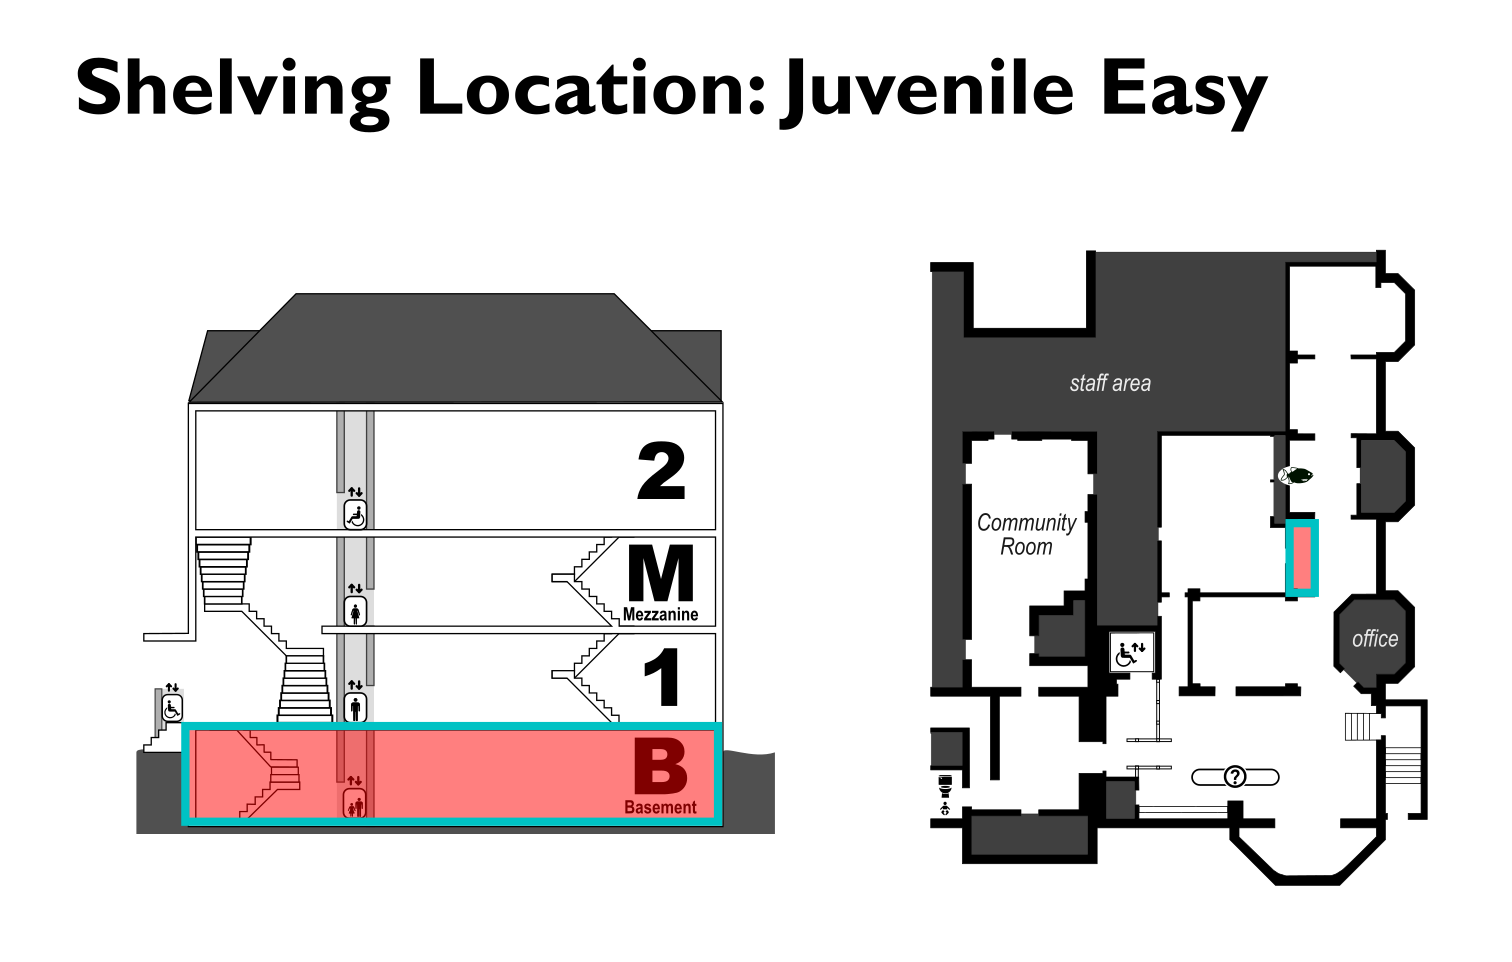 map showing location of the Juvenile Easy shelving location